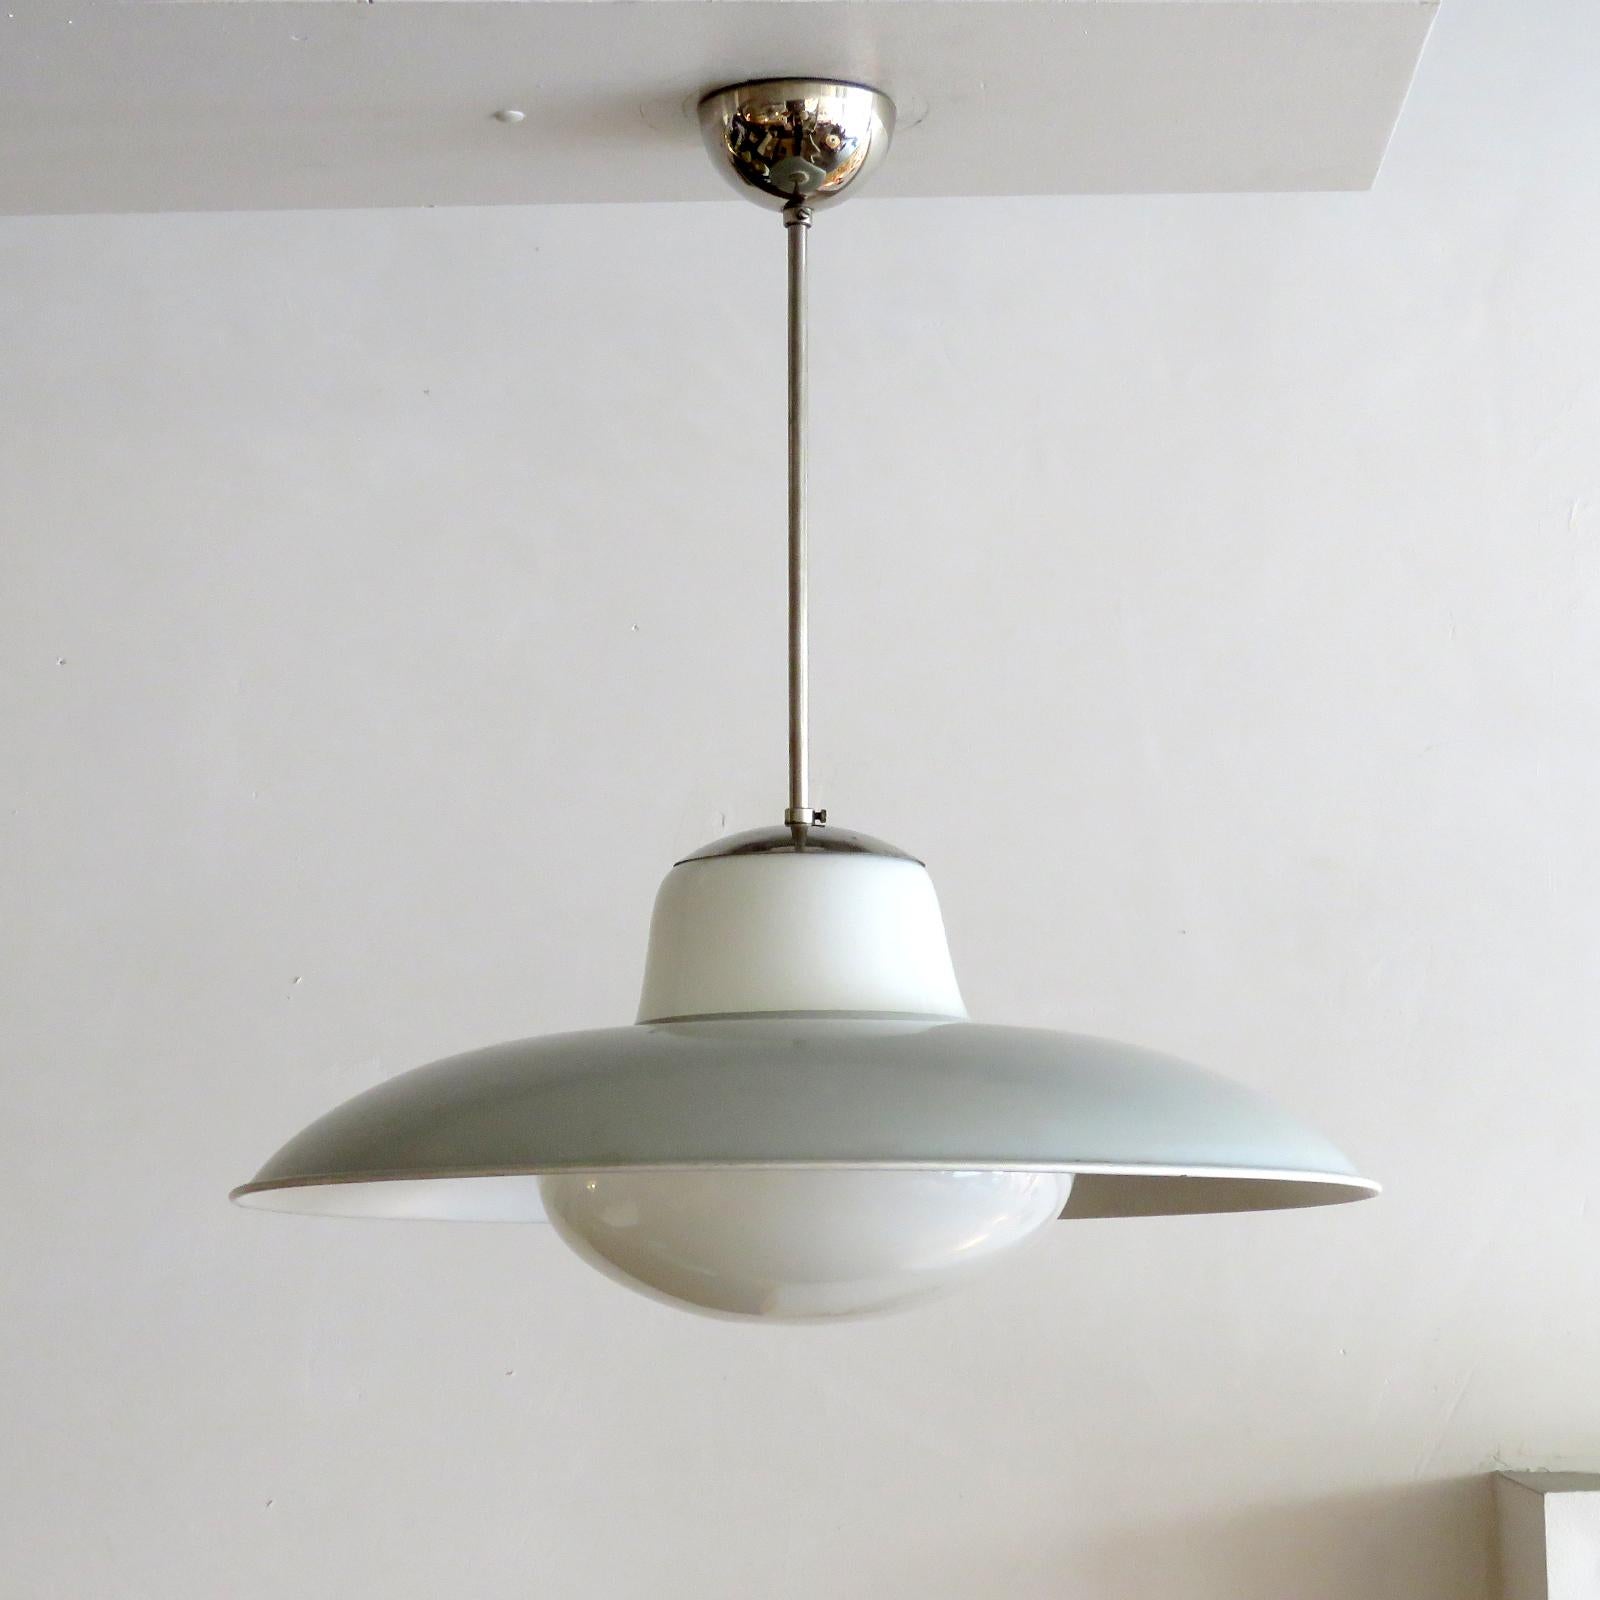 Wonderful '1059' pendant lights by Gunilla Jung for Stockmann-Orno in nickel-plated brass with white opaline shades under a white metal reflector, manufacturer mark, wired for US standards, one E27 socket, max. wattage 75w, bulbs provided as a one